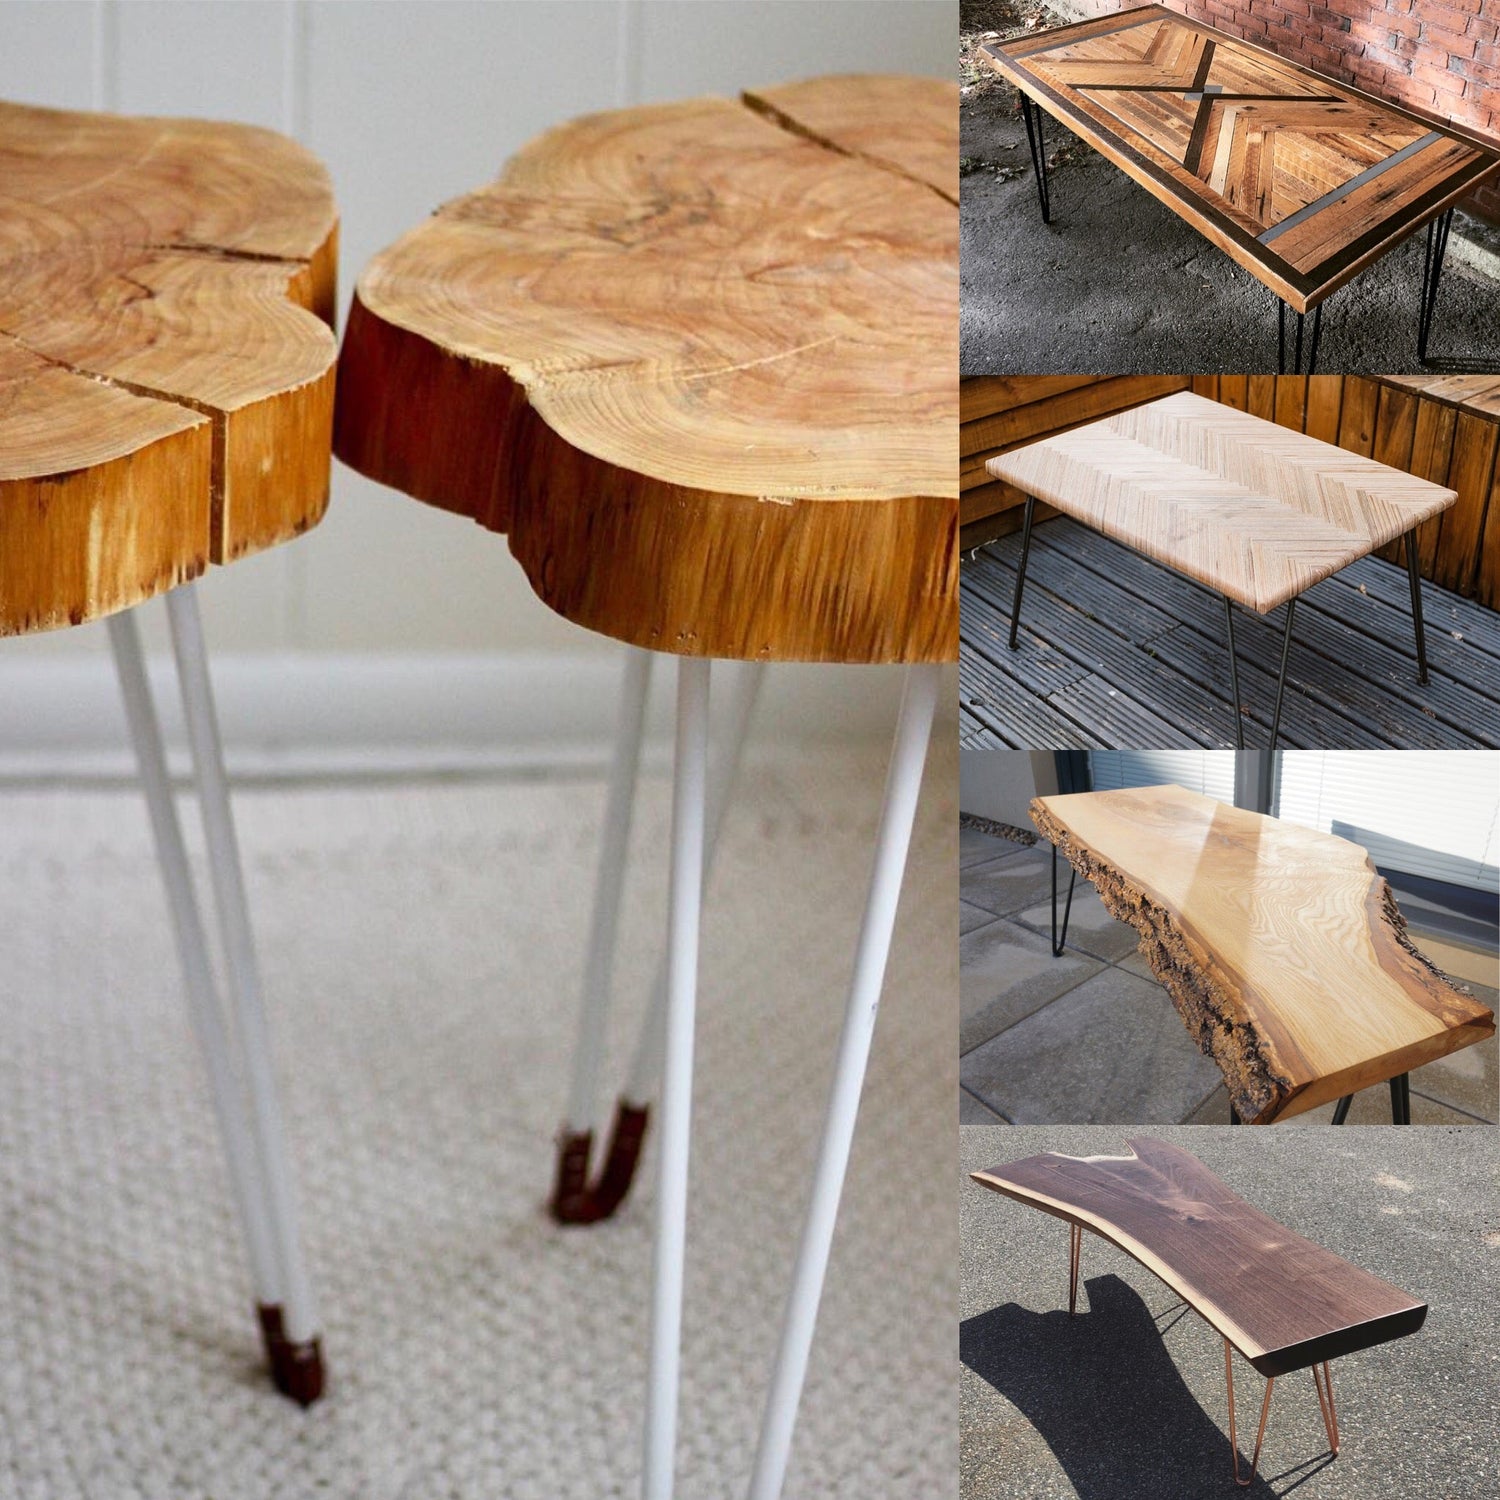 5 inspiring wooden tables with hairpin legs - The Hairpin Leg Co.